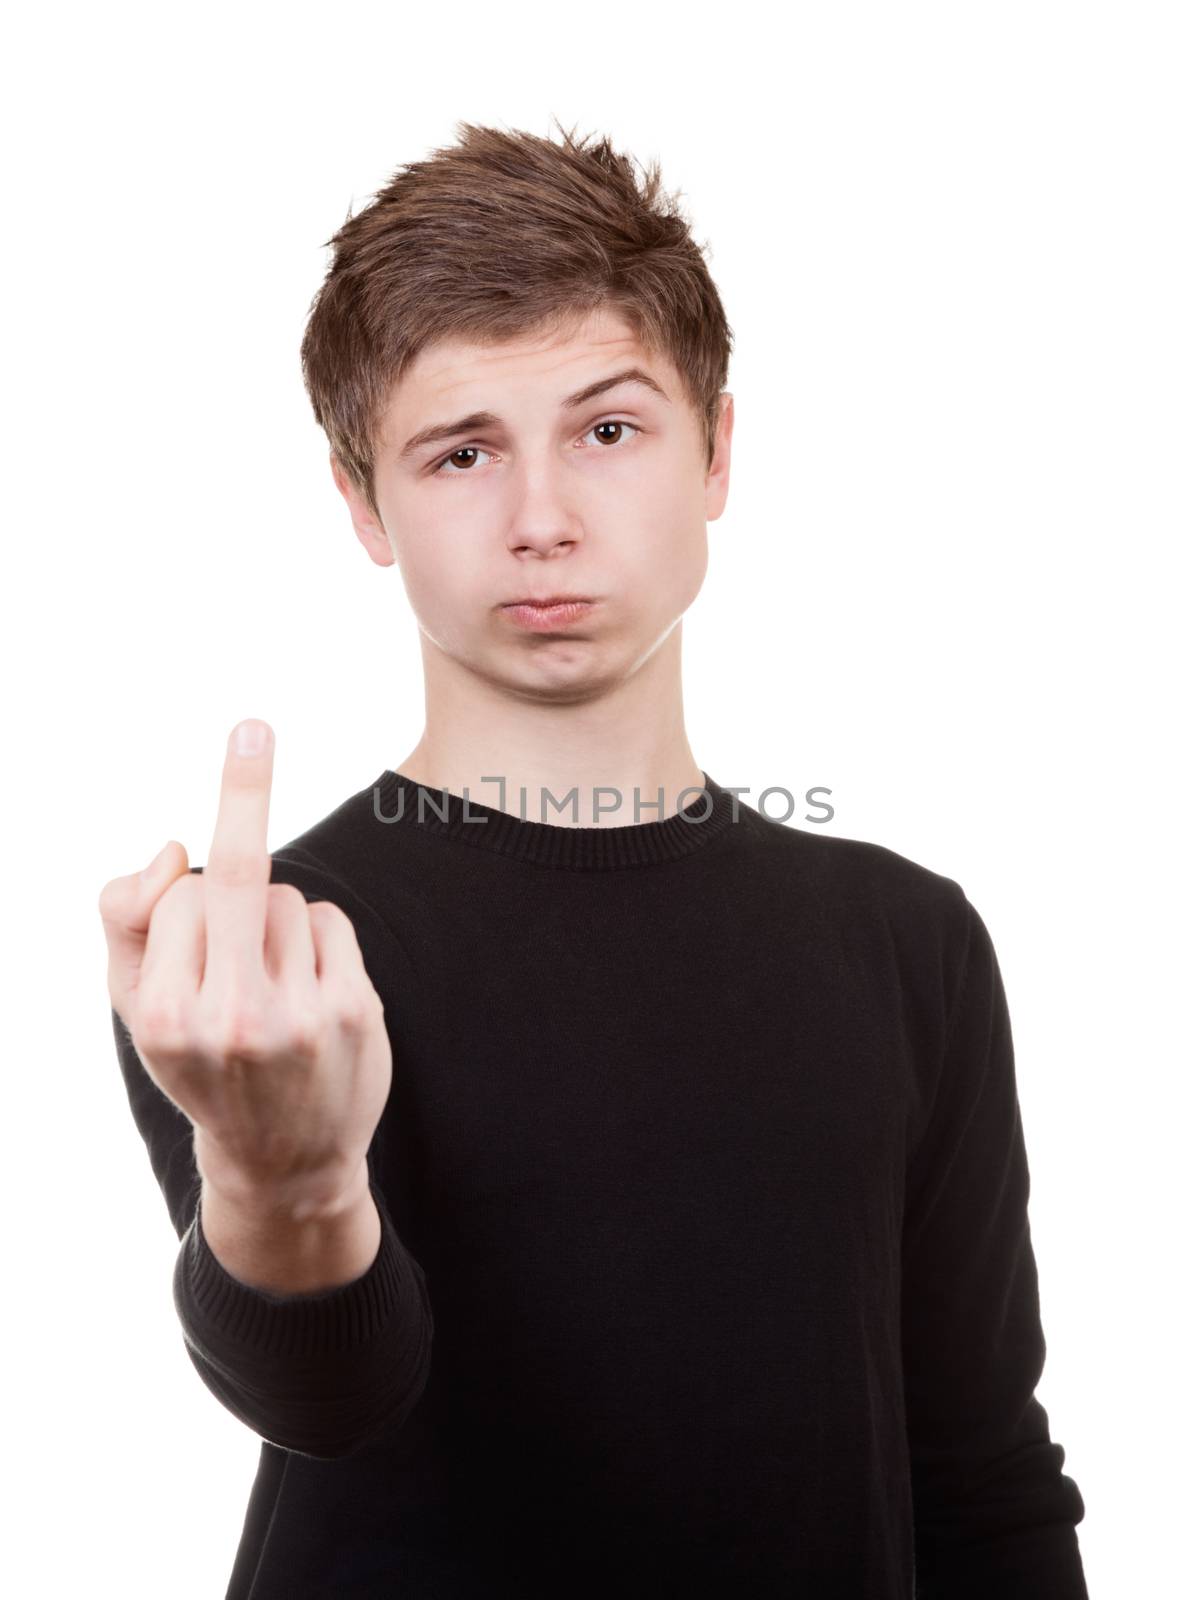 Sullen teenager shows the middle finger. Isolated on a white background